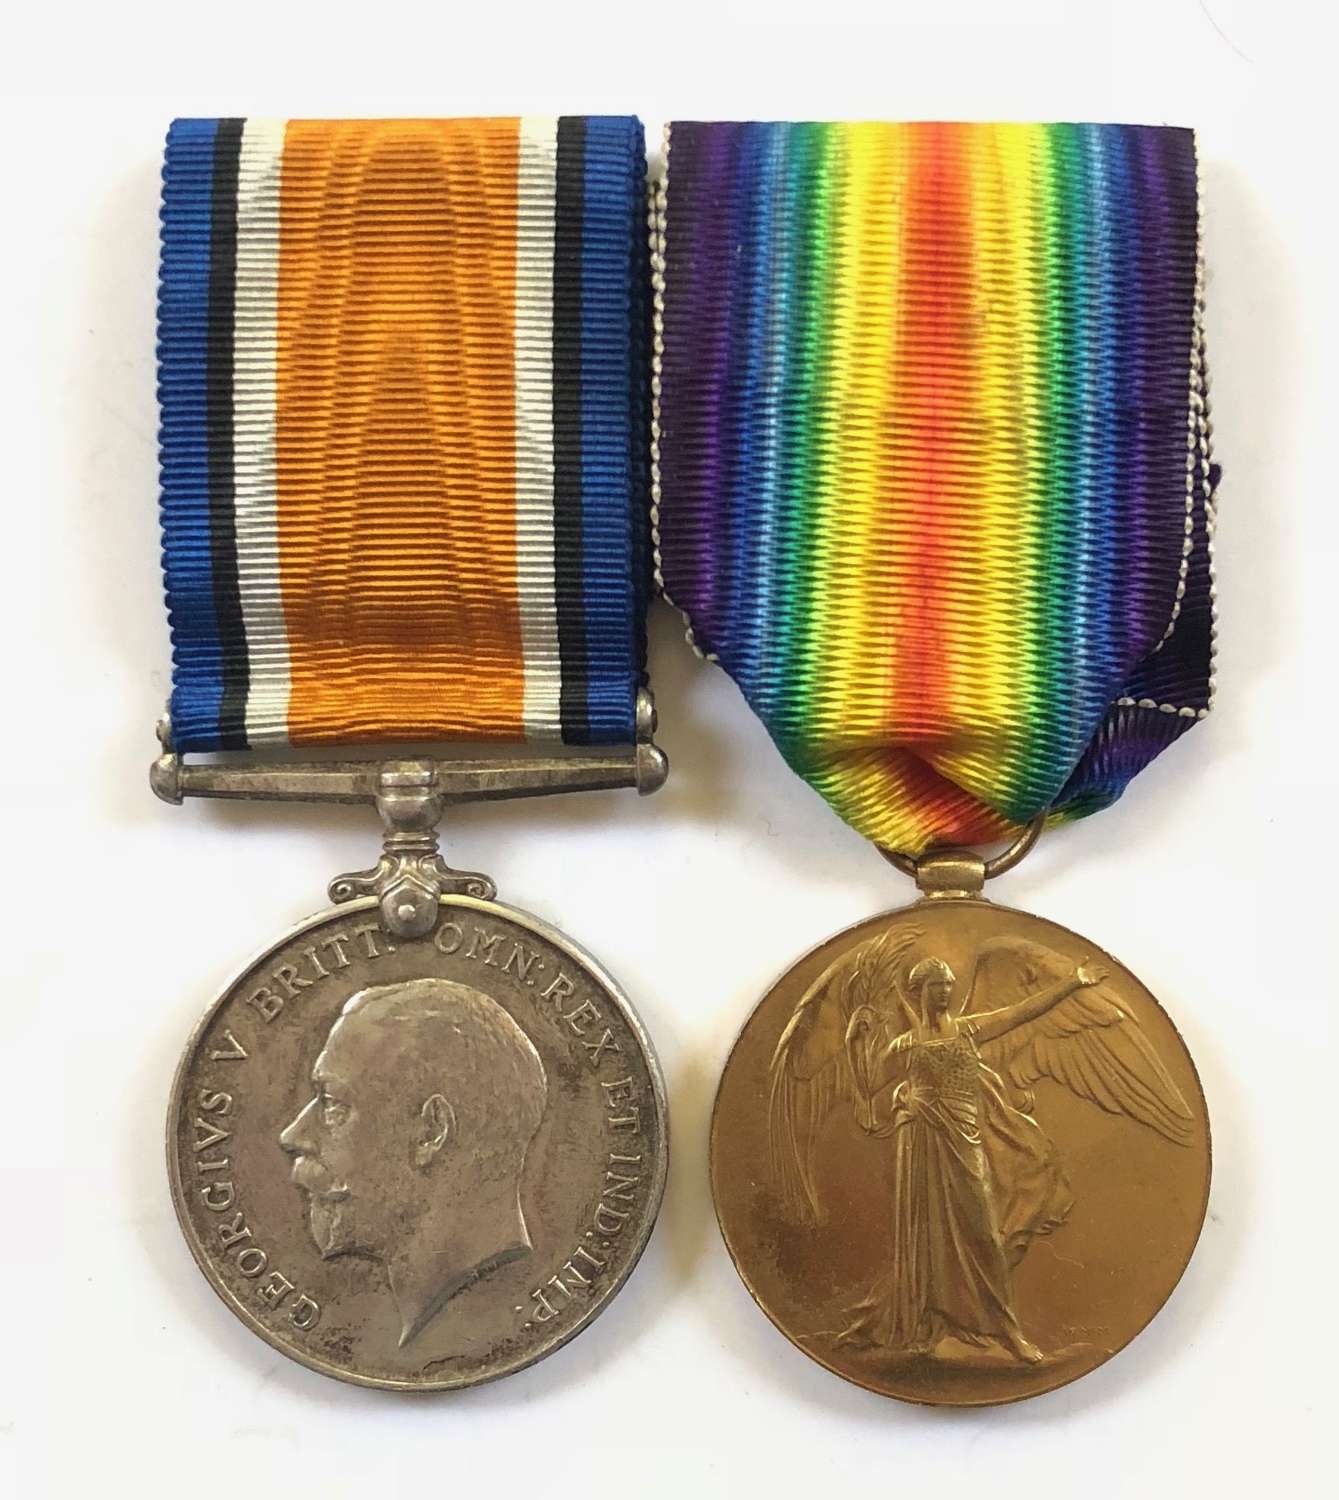 WW1 King's Own Scottish Borderers KOSB Pair of Medals.